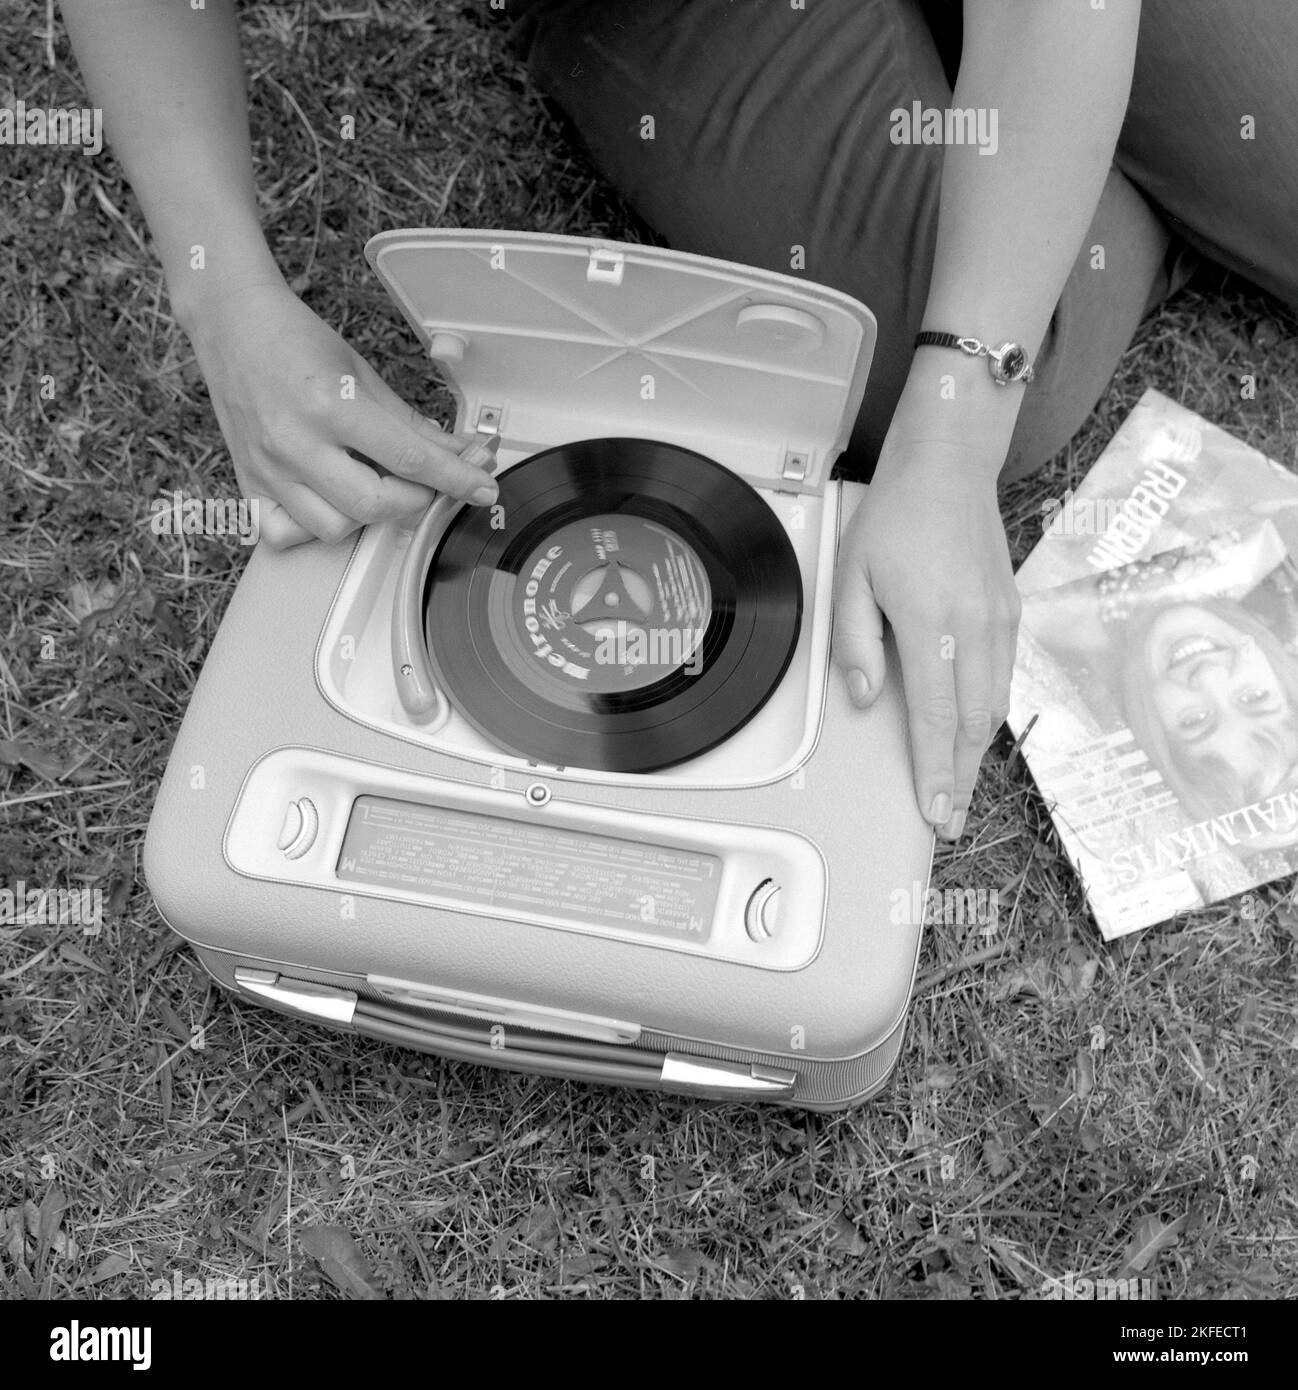 How a combined portable radio and record player looked in the 1960s. A gramophone player as it looked at this time.  This model was battery operated and could play singles,  7 inches 45 rpm vinyl records. You could also listen to the radio on it's radio function, turning the knobs to the frequency and station you wanted to listen to. A practical lid is seen opened and when not using the gramophone you closed it.  Sweden 1960 Conard ref 4264 Stock Photo